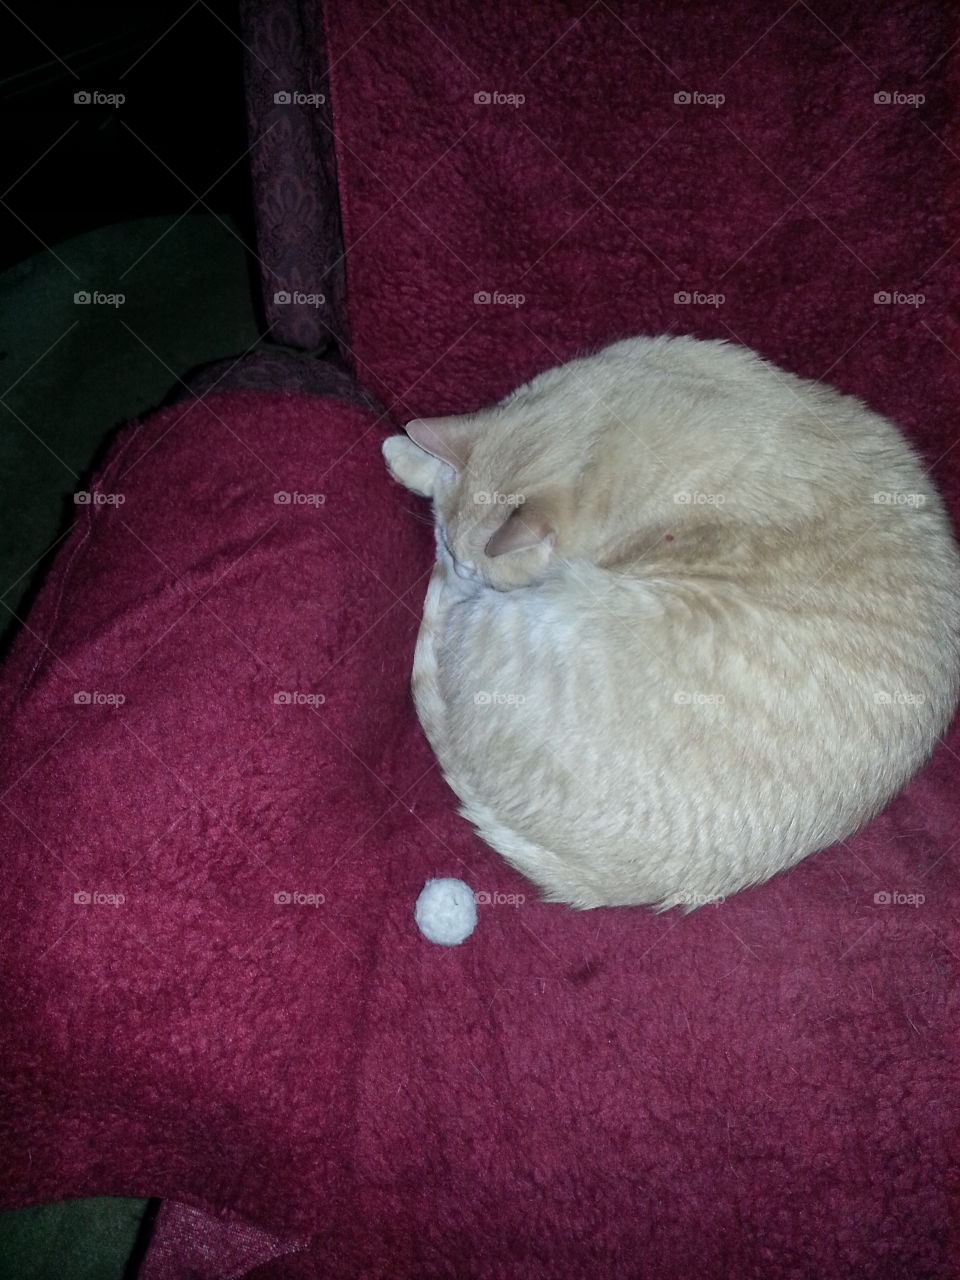 Sleeping kitty with puff toy